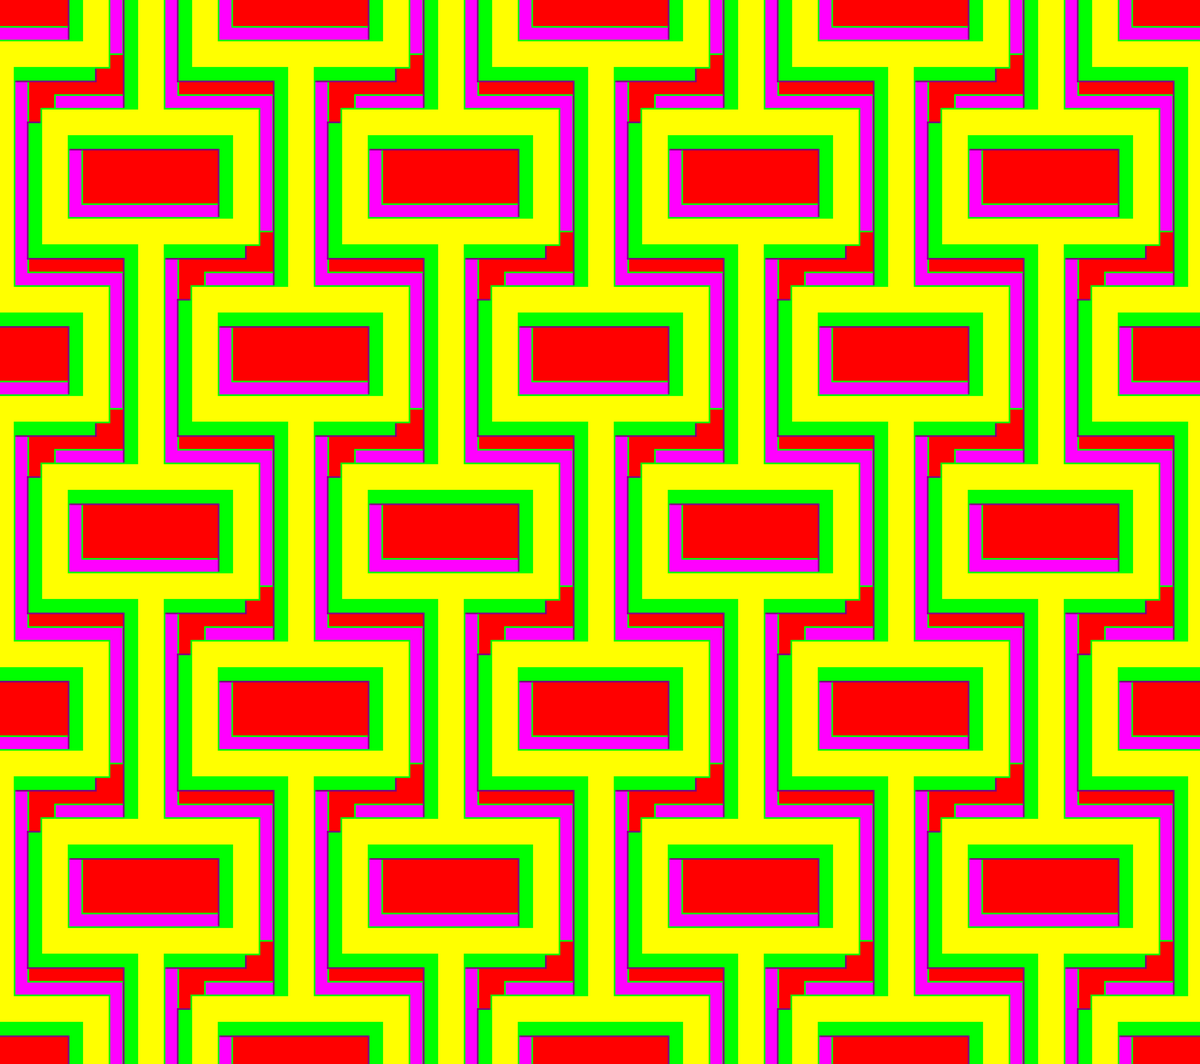 conectedsquares_greenfusciaonred_resize.png